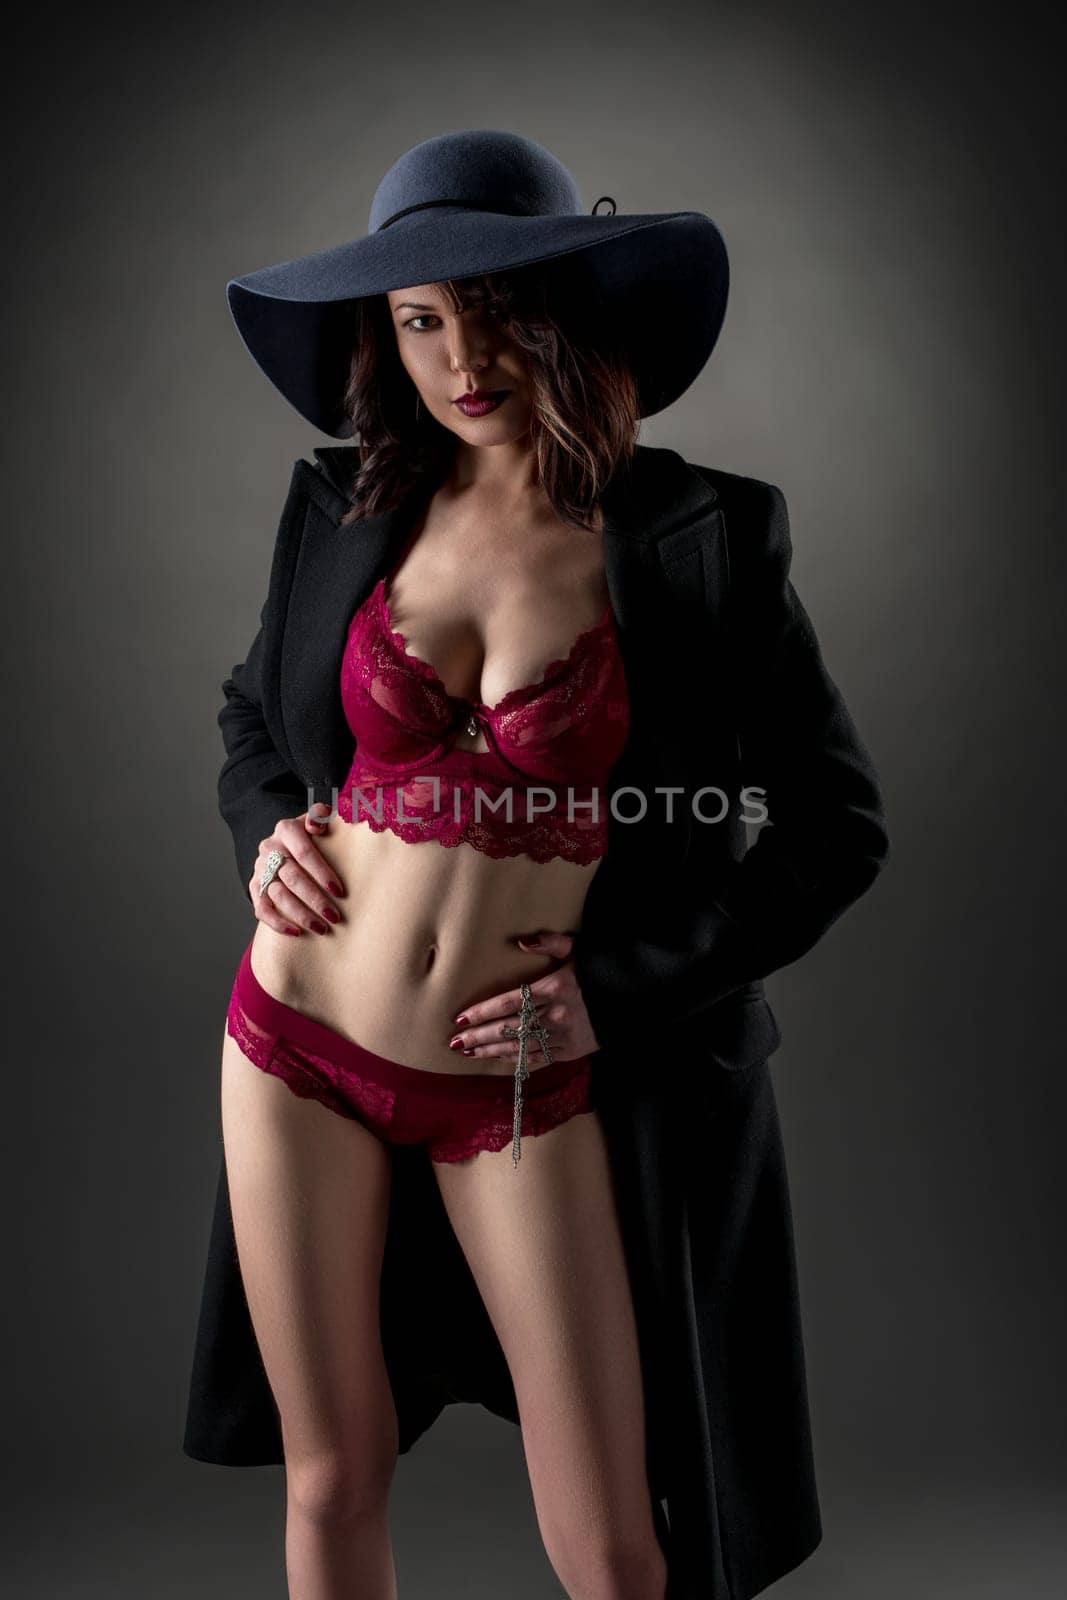 Stylishly dressed woman showing her sexy lingerie by rivertime